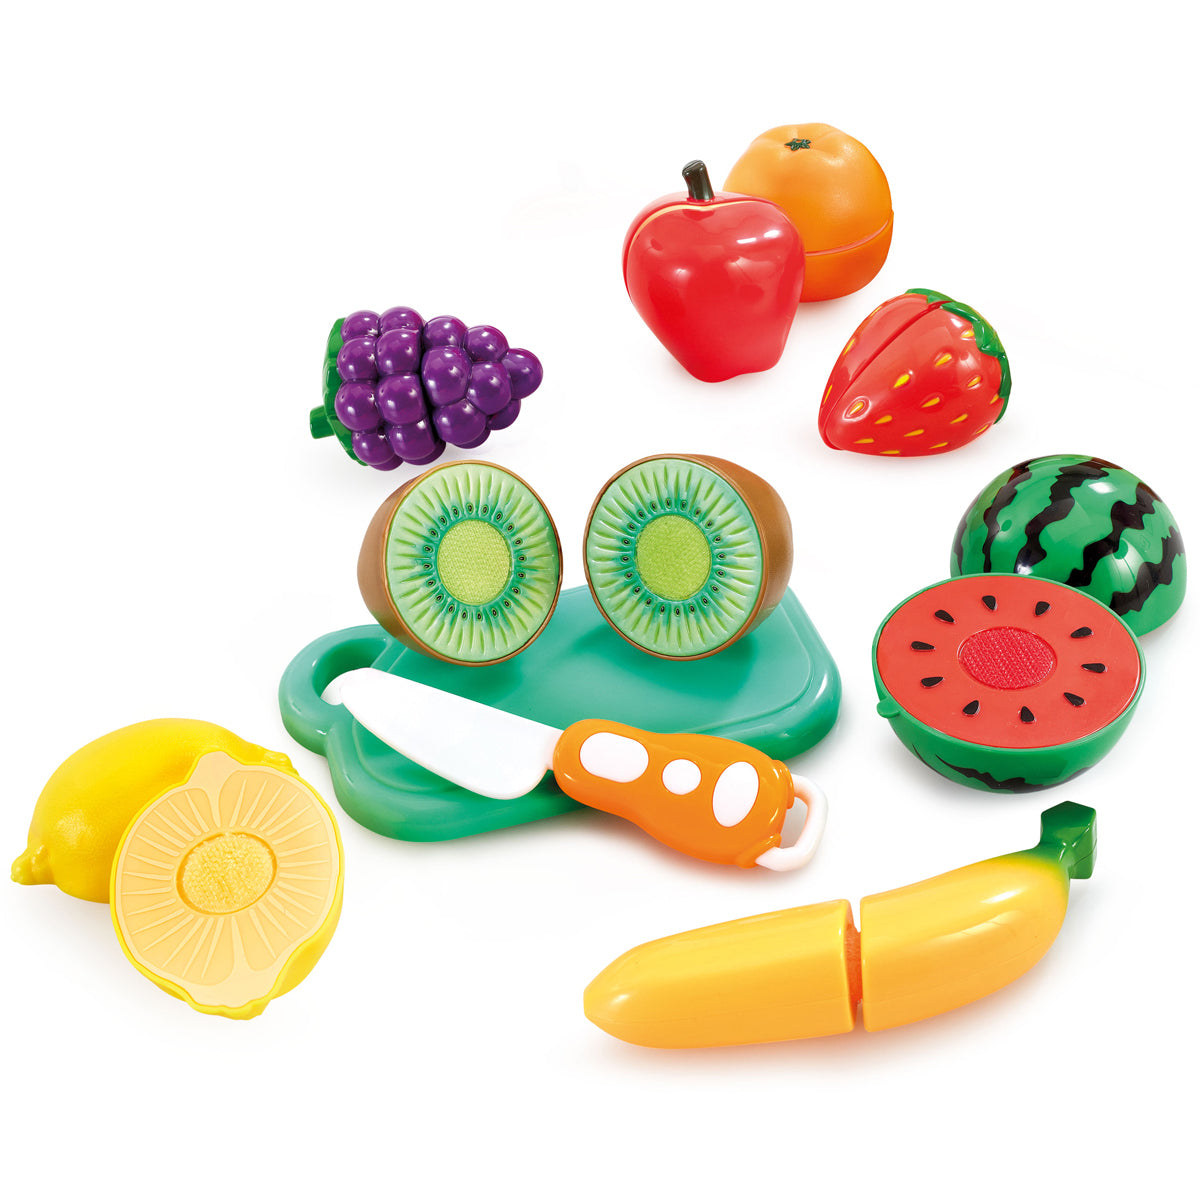 Busy Me Slice and Play Fruit Set